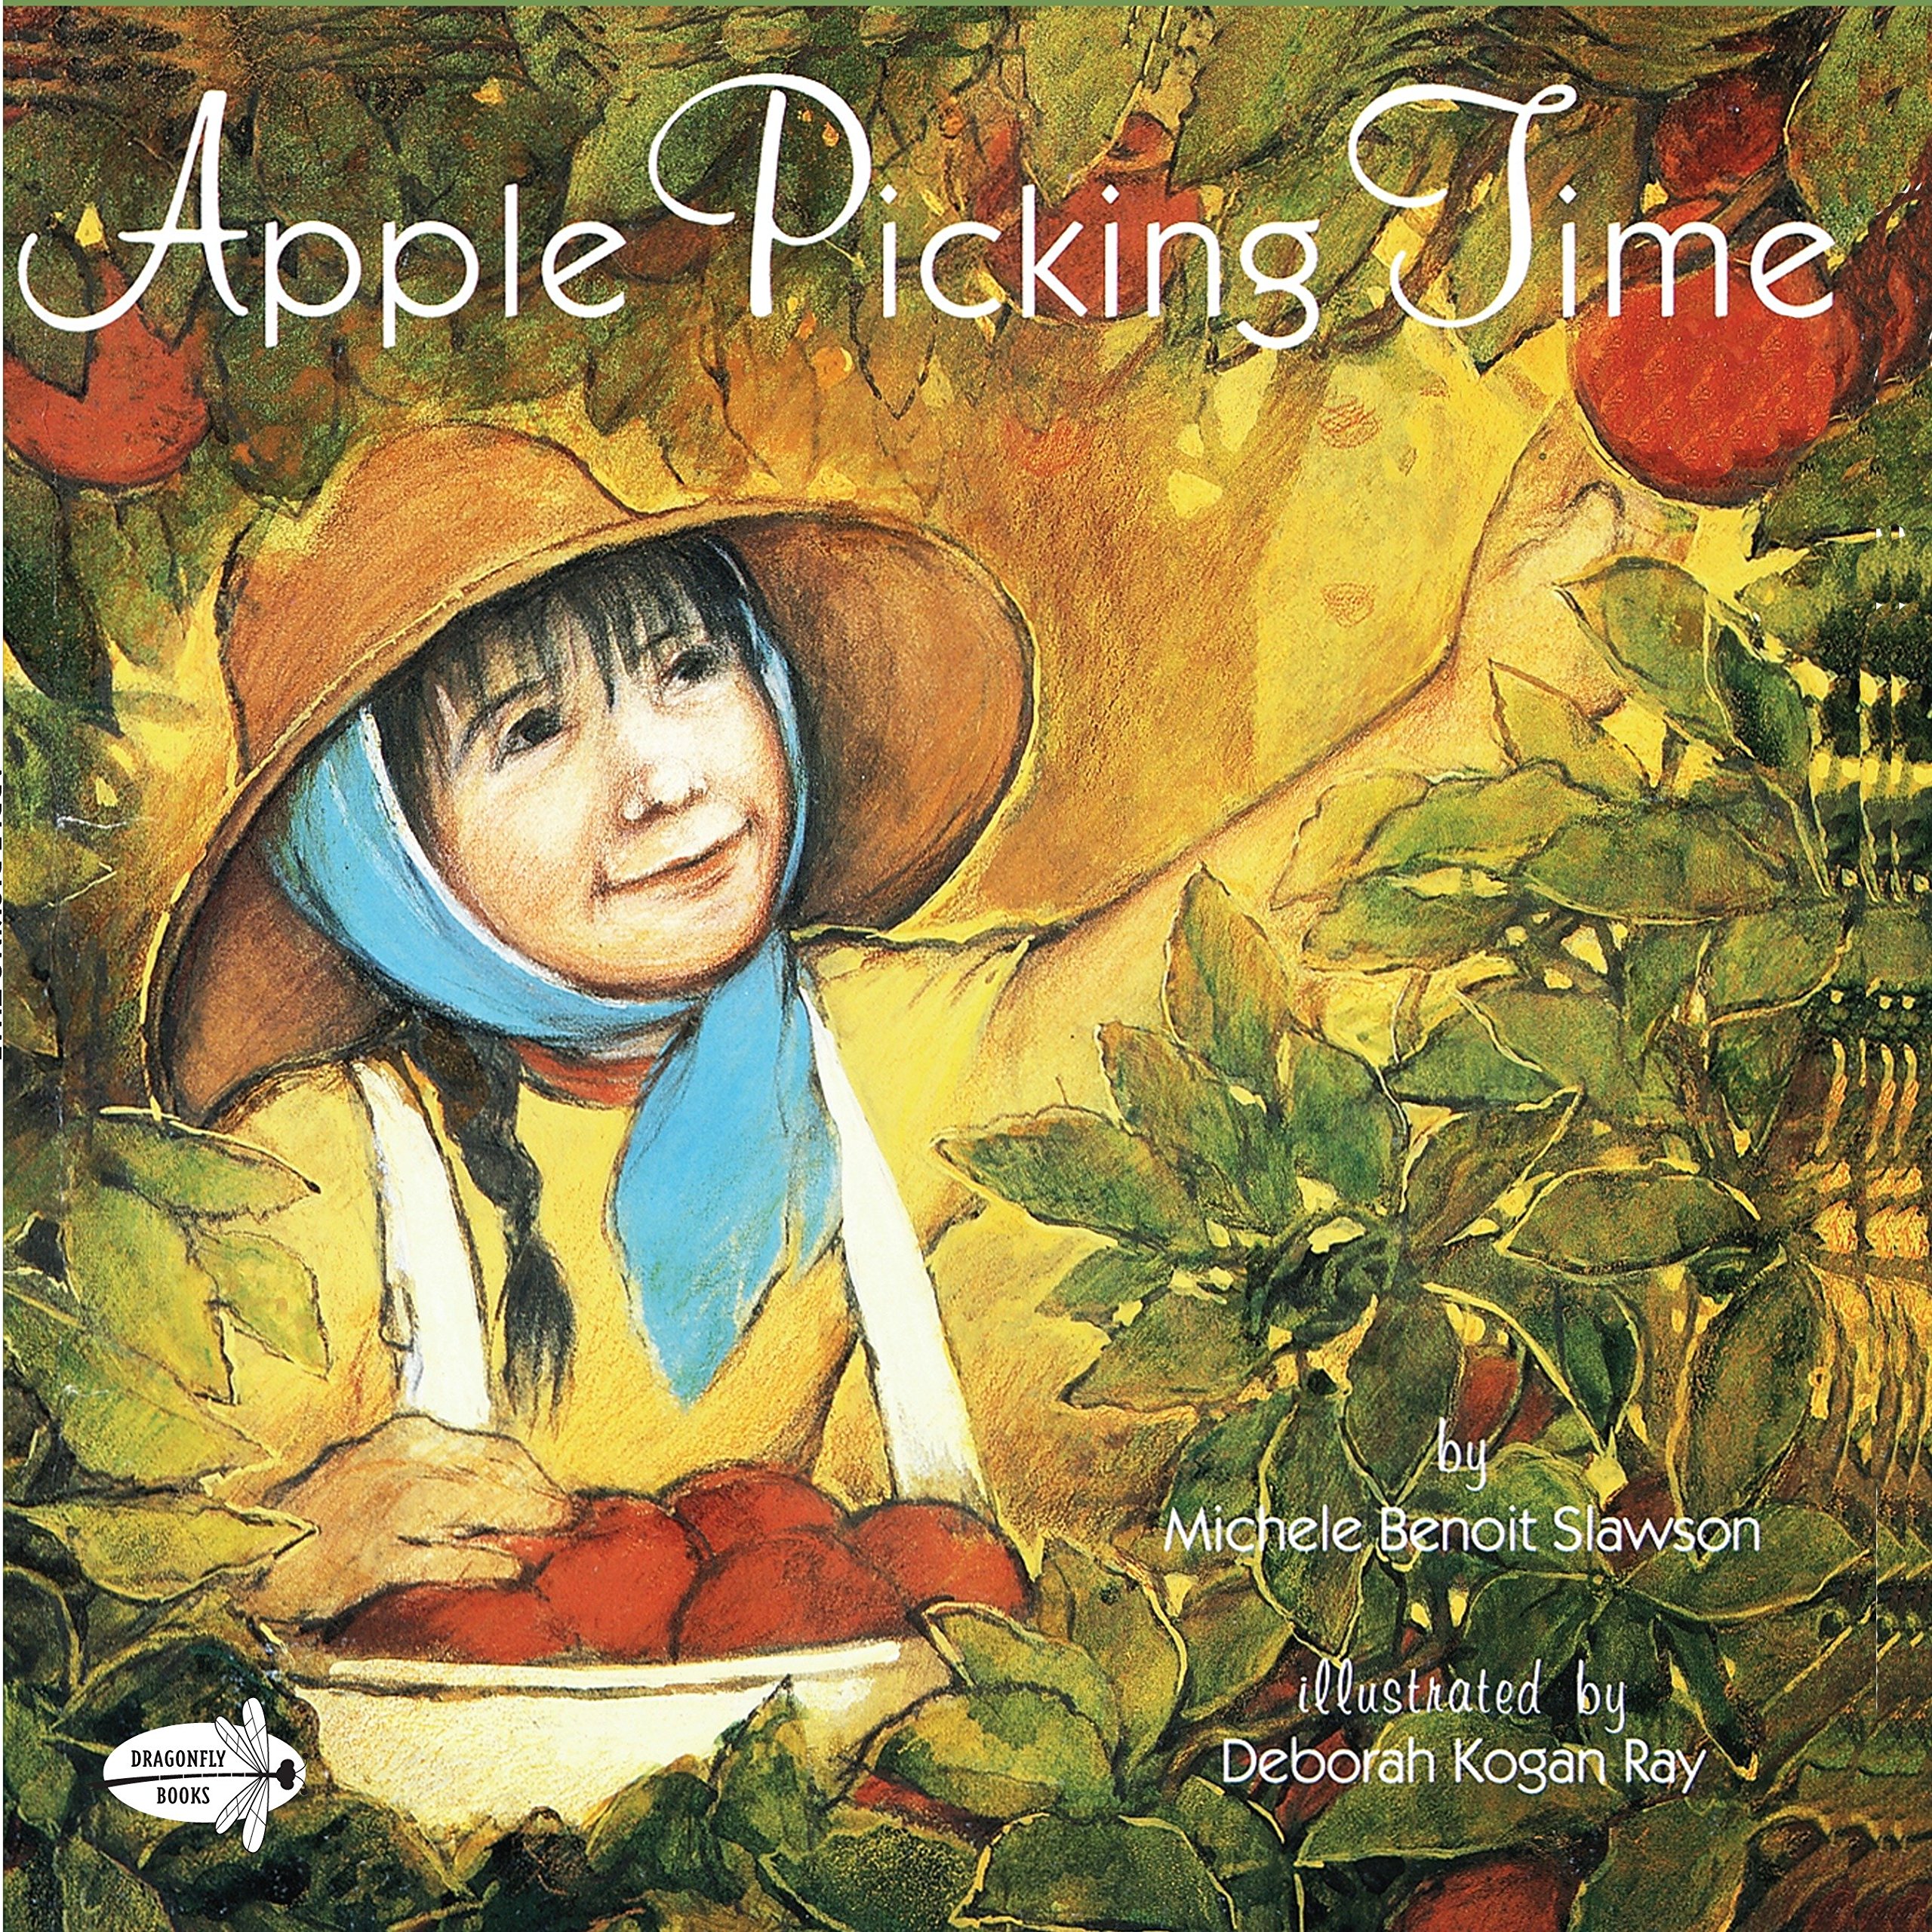 speech and language teaching concepts for Apple Picking Time in speech therapy​ ​